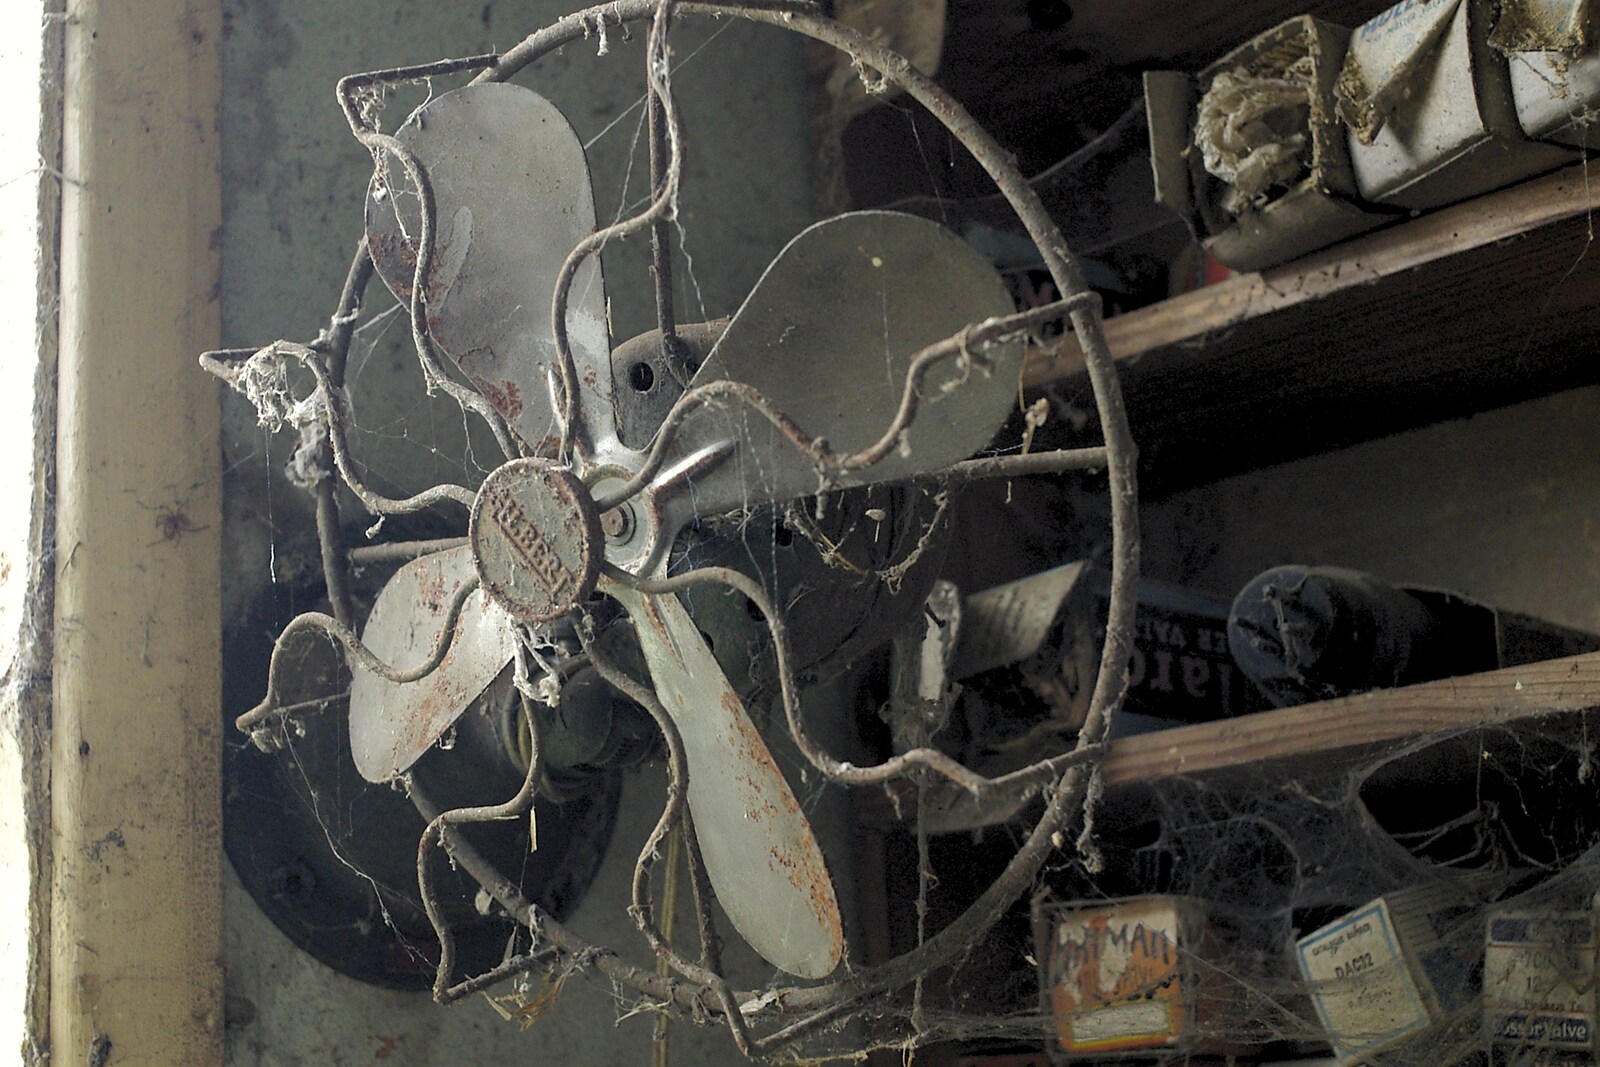 A fantastic old fan from An Elegy for a Shed, Hopton, Suffolk - 28th March 2005